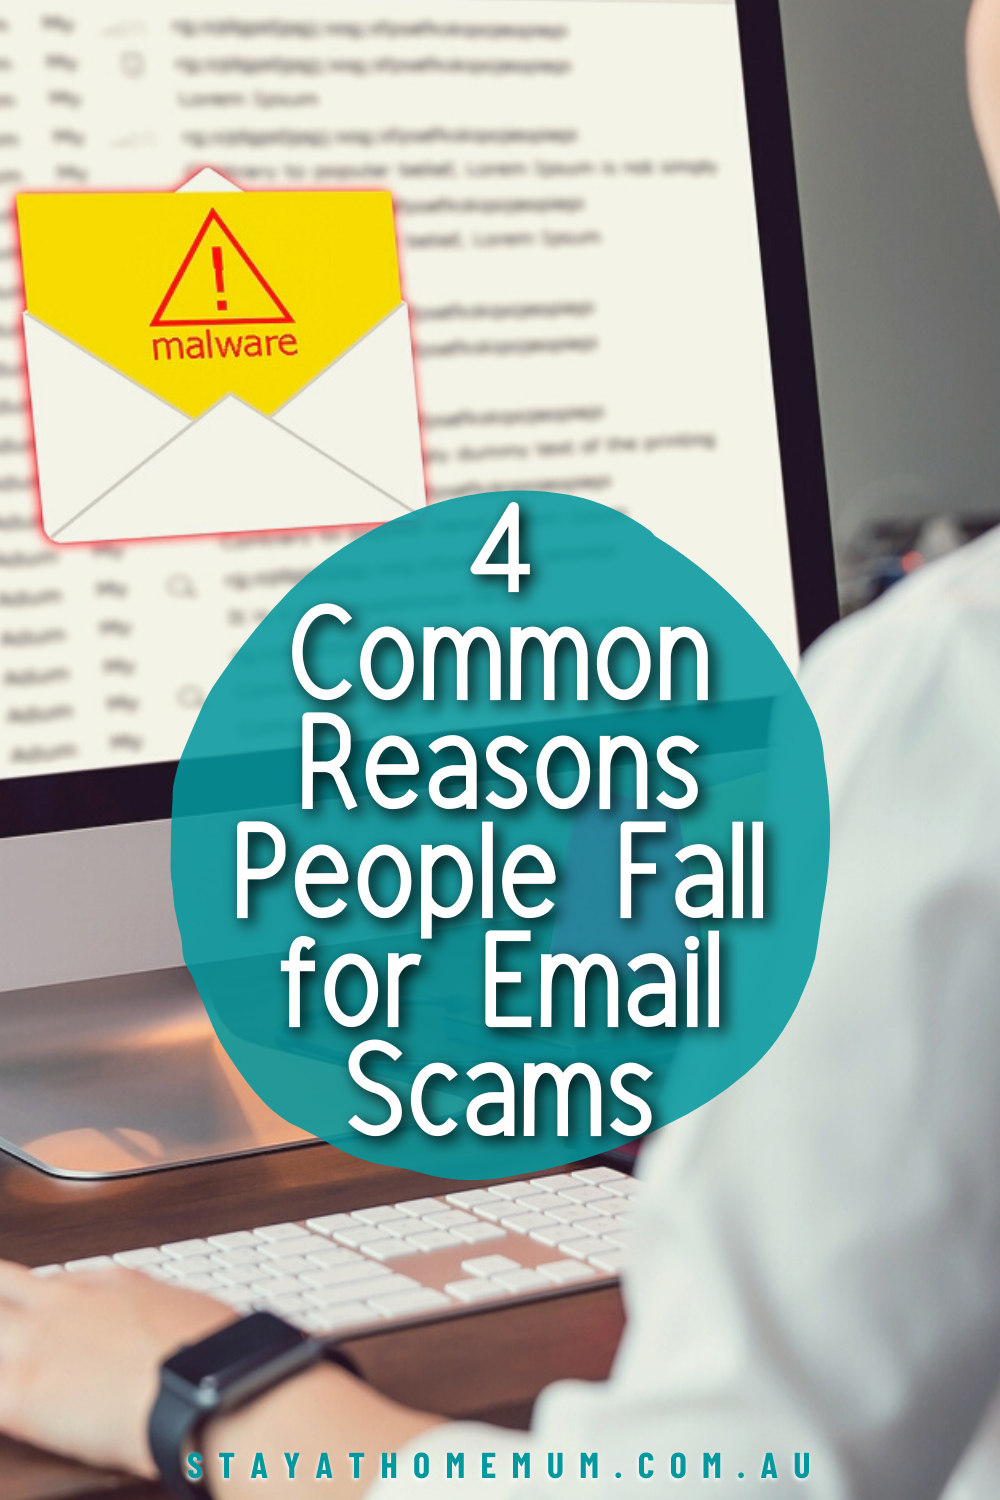 4 Common Reasons People Fall for Email Scams | Stay At Home Mum